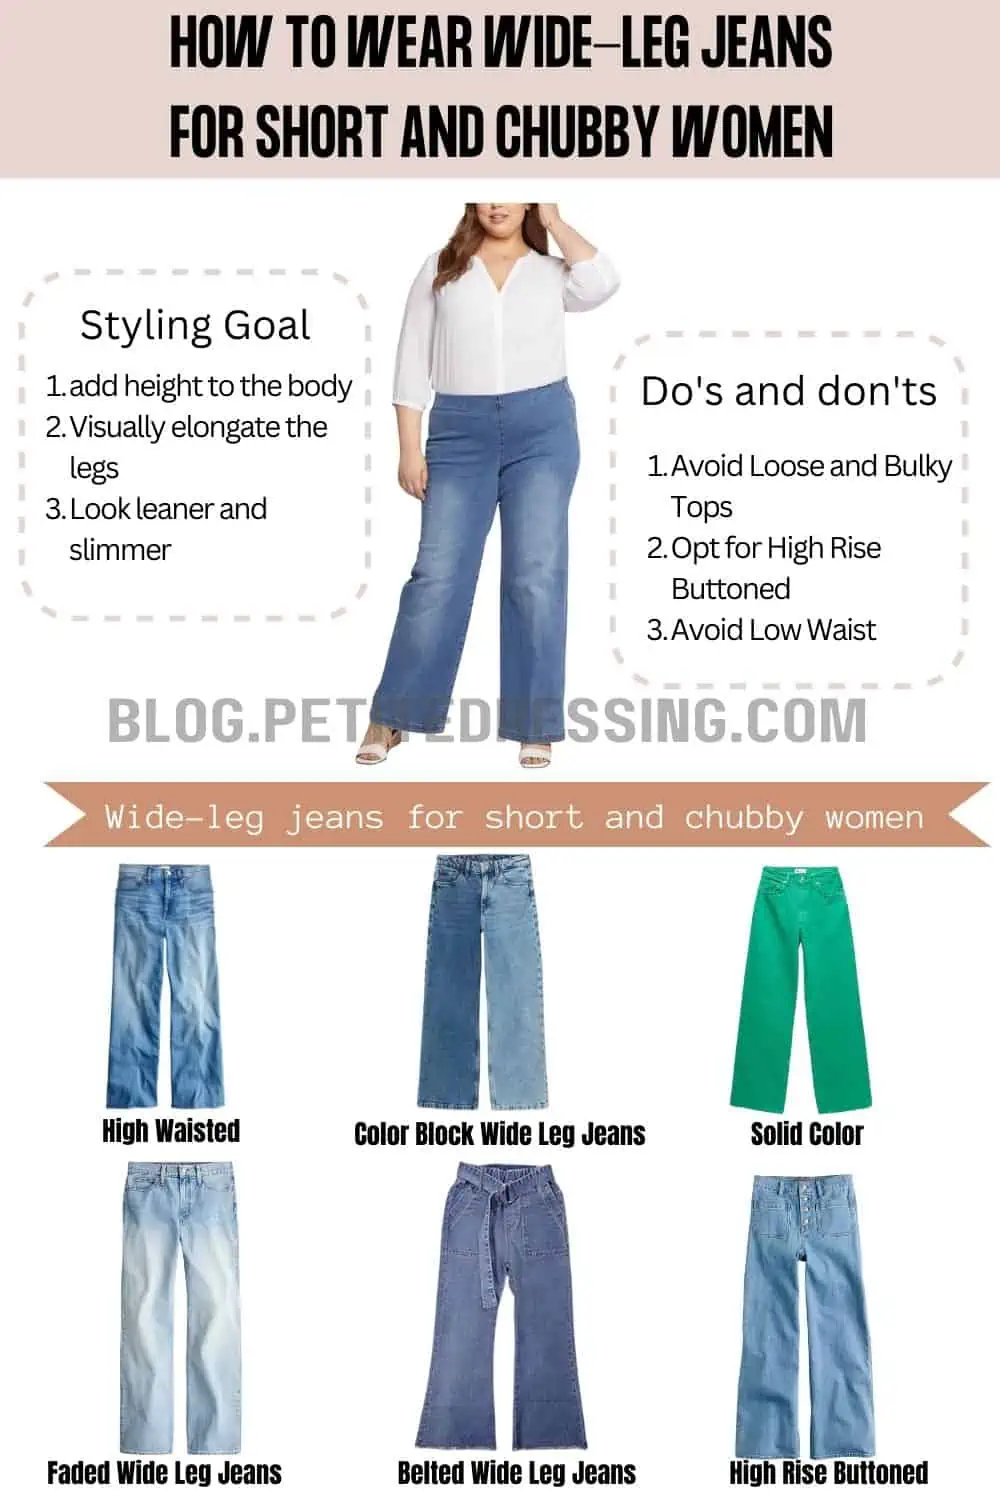 HOW TO STYLE WIDE LEG PANTS FOR SHORT GIRL 